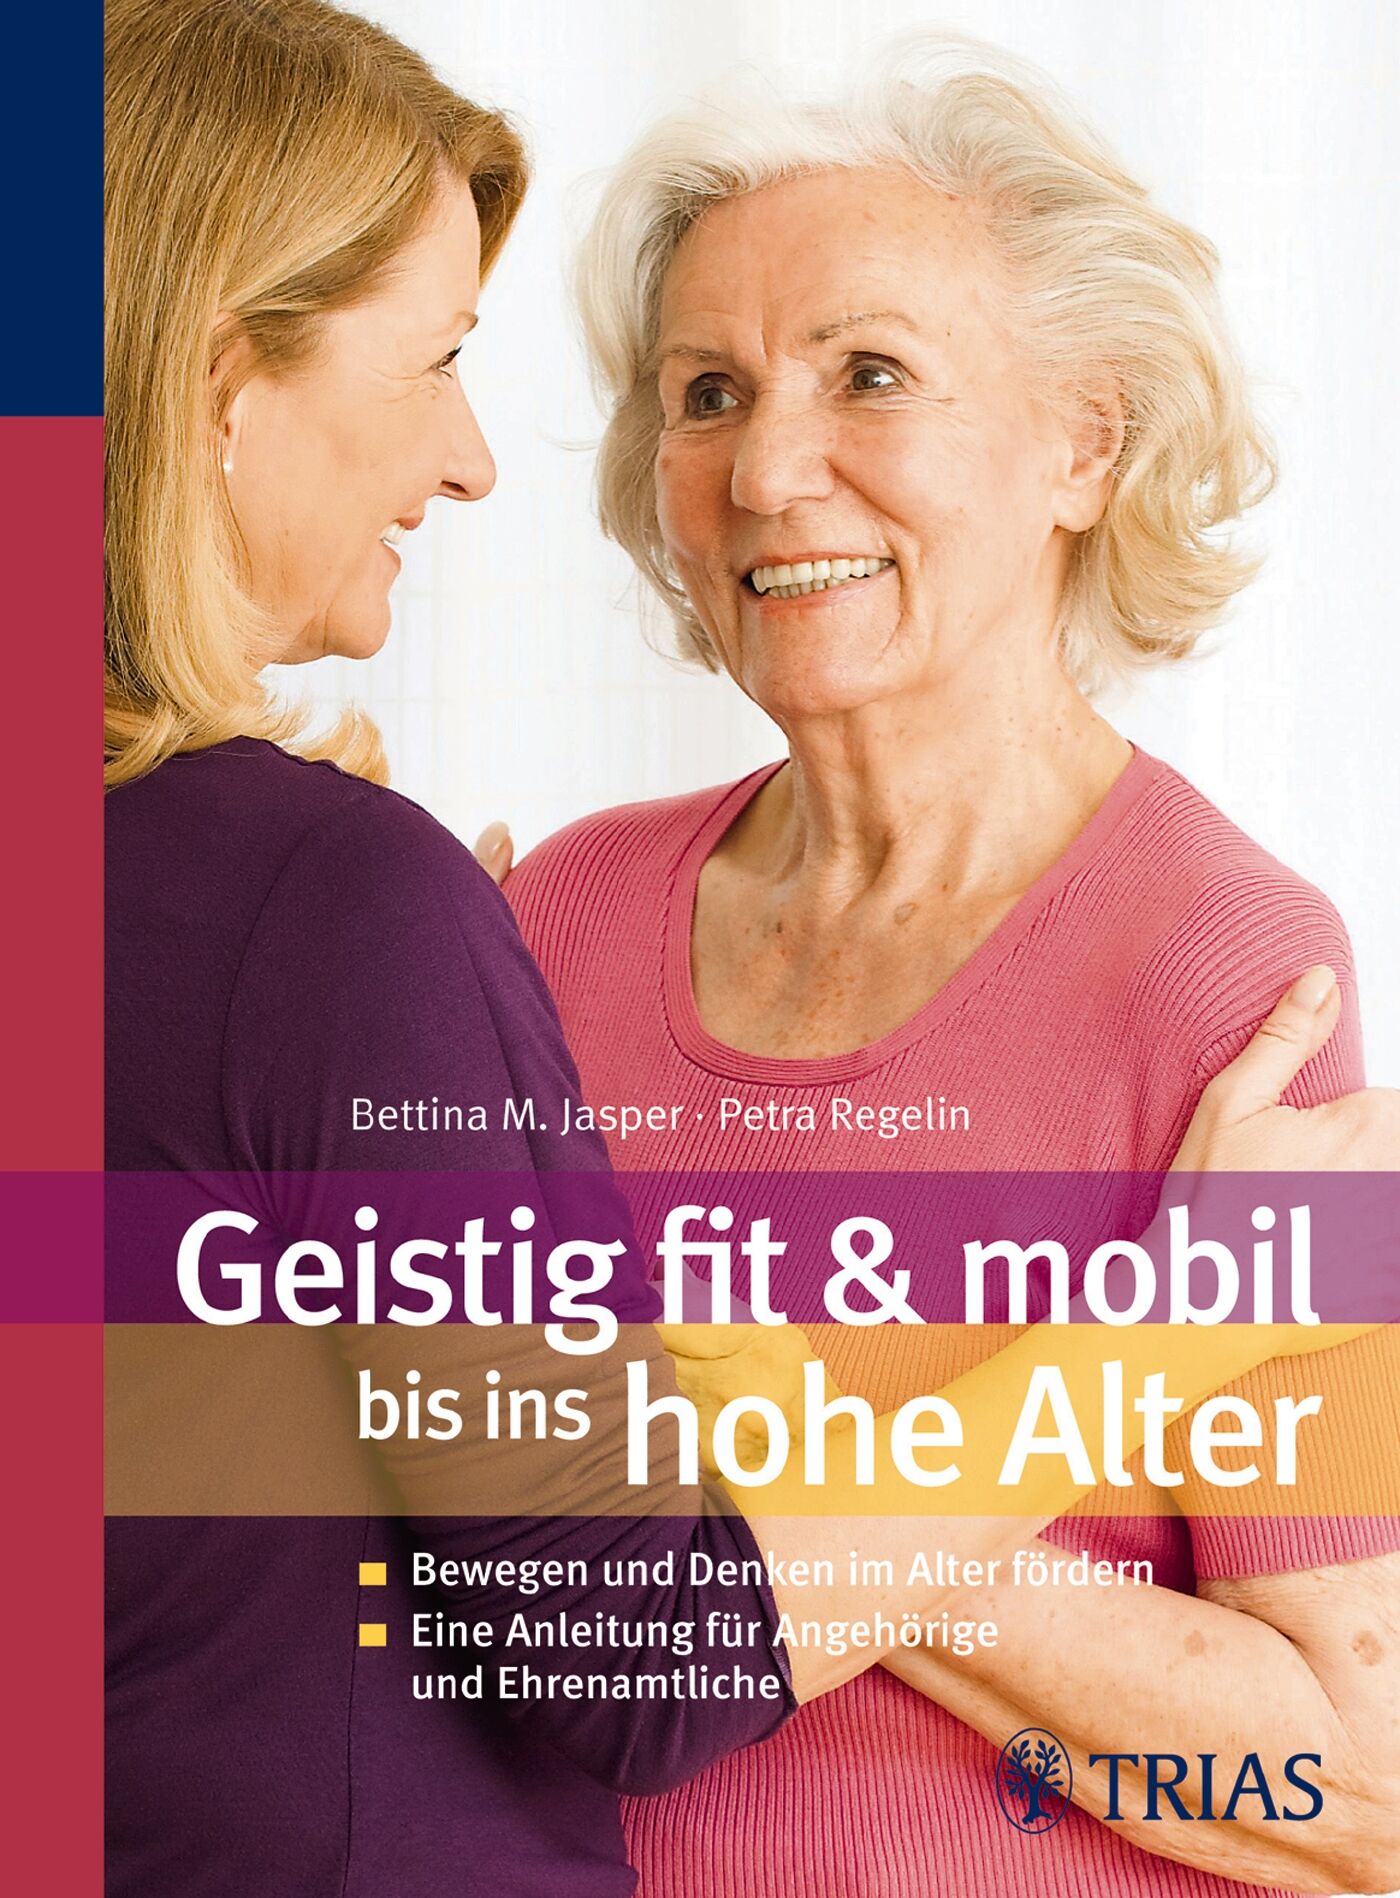 Geistig fit & mobil bis ins hohe Alter, 9783830461838